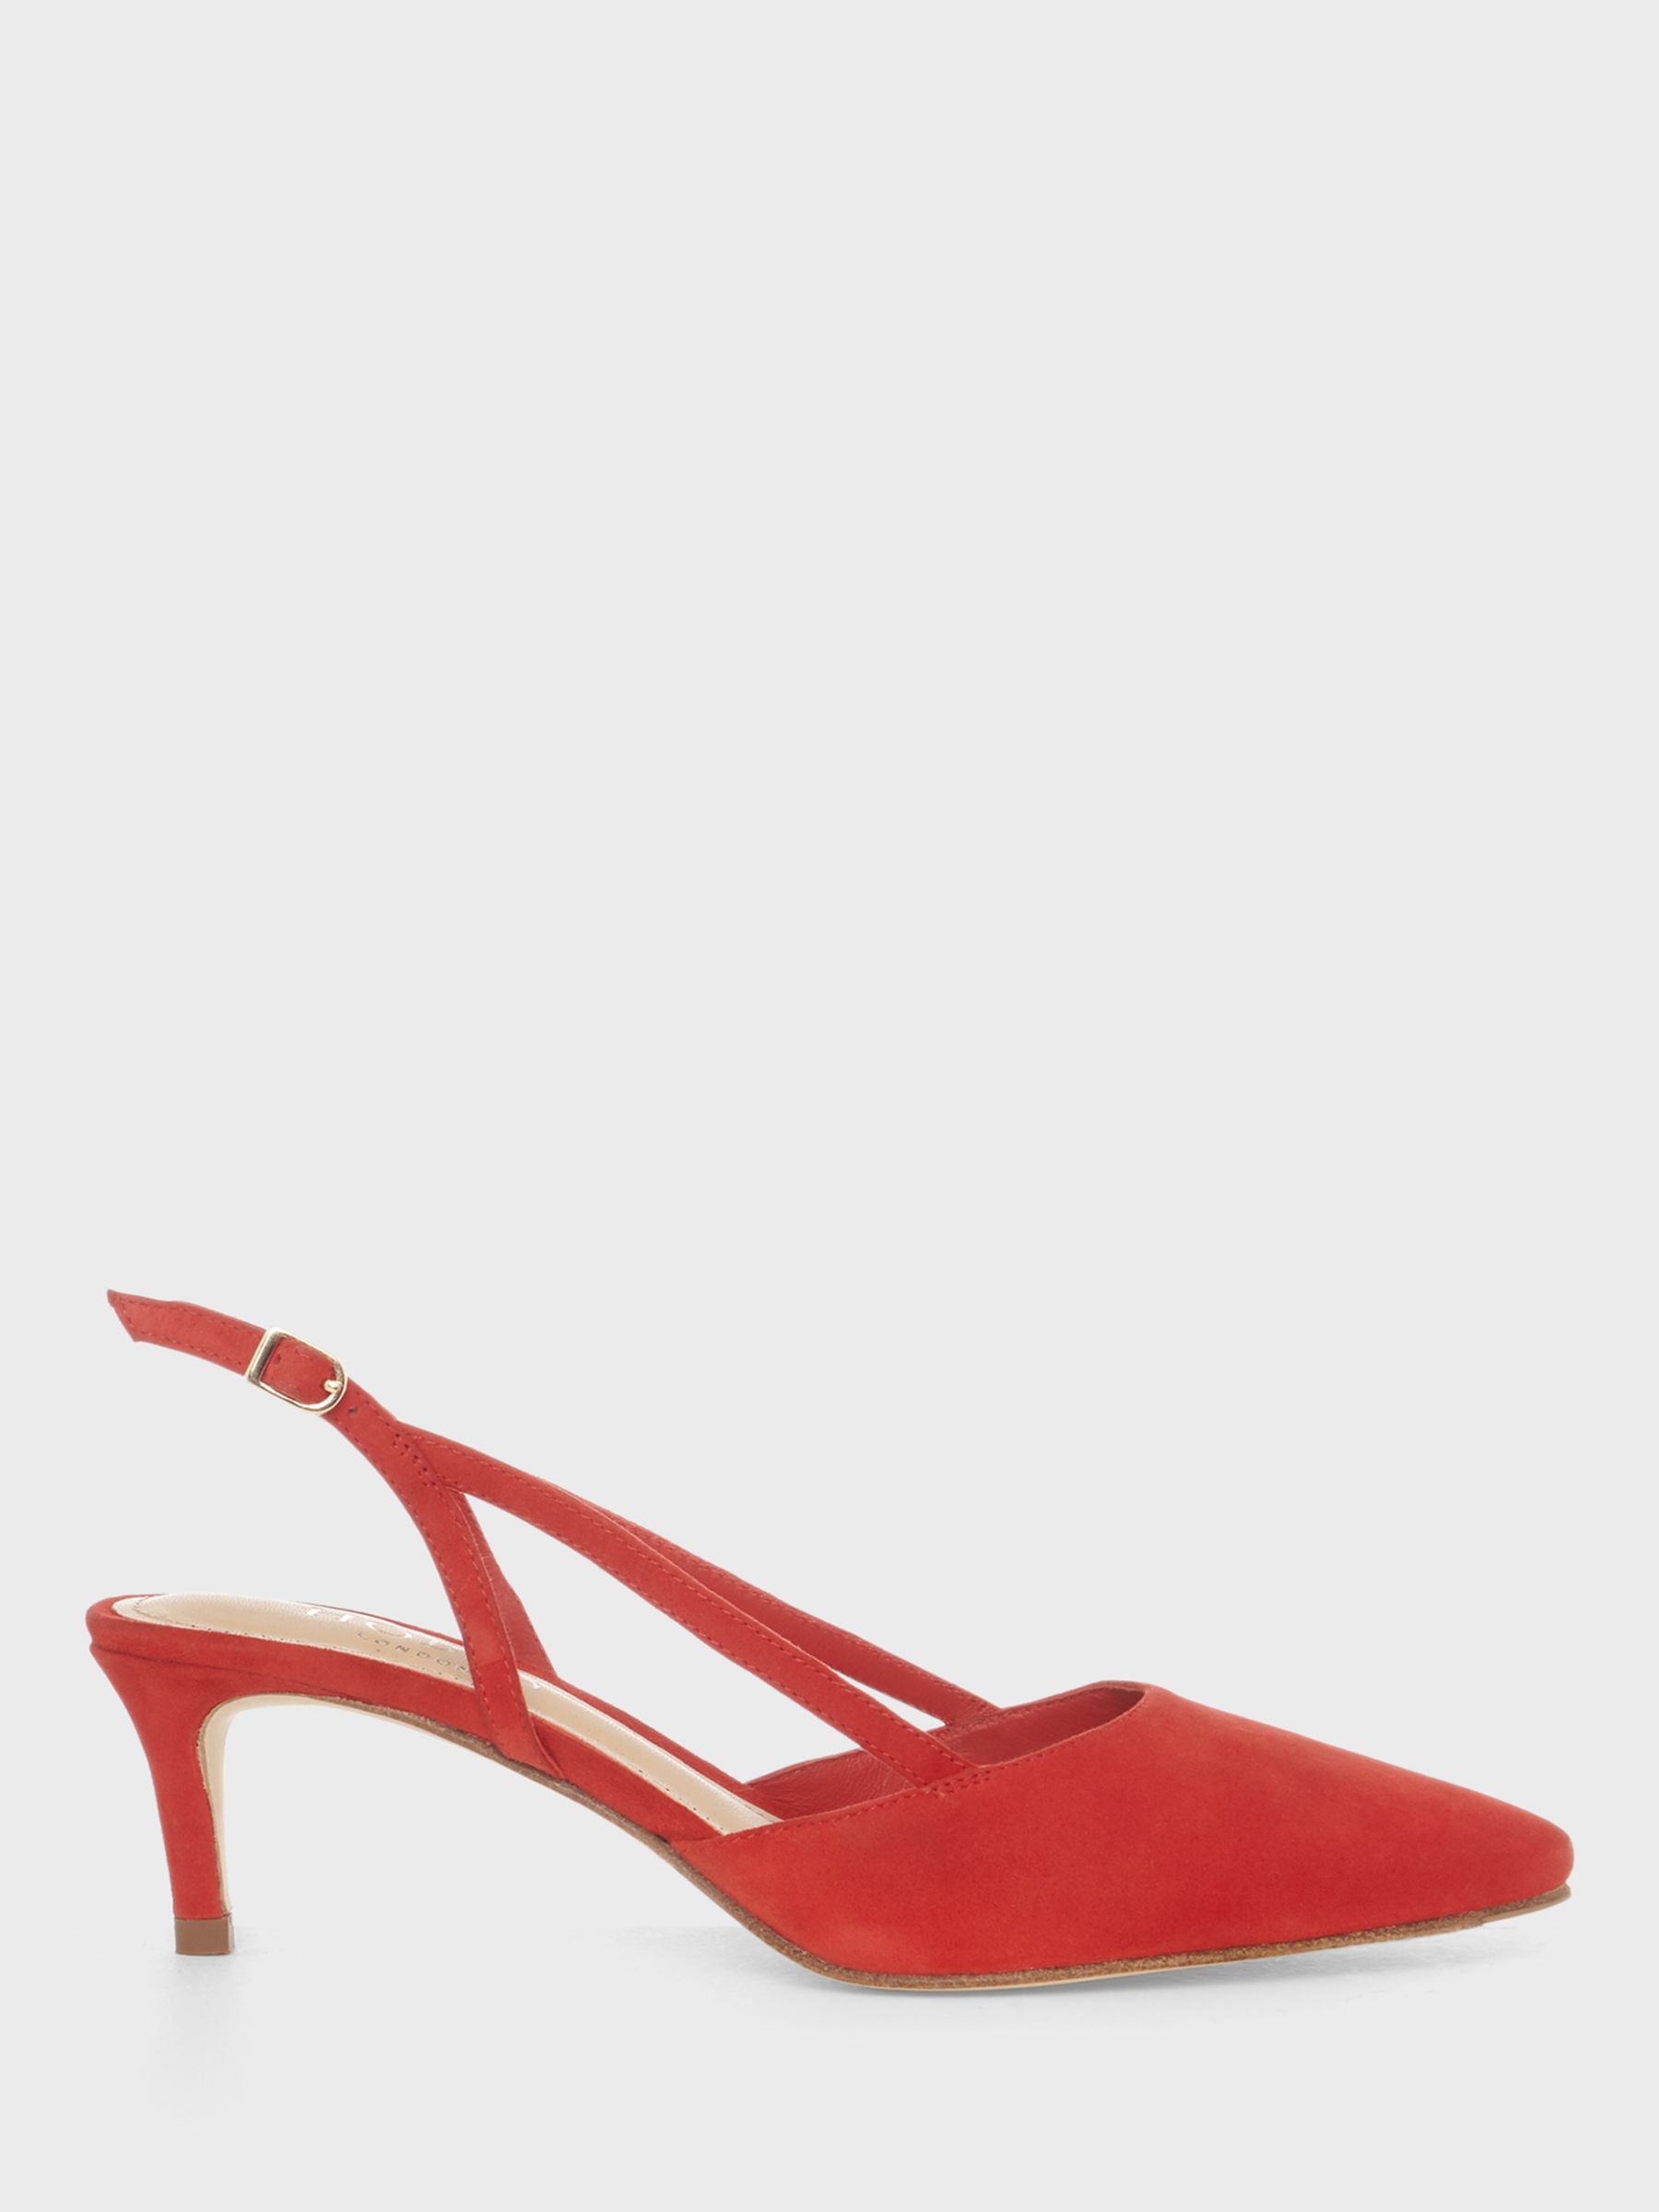 Hobbs Melissa Suede Slingback Court Shoes, Wildflower Red at John Lewis ...